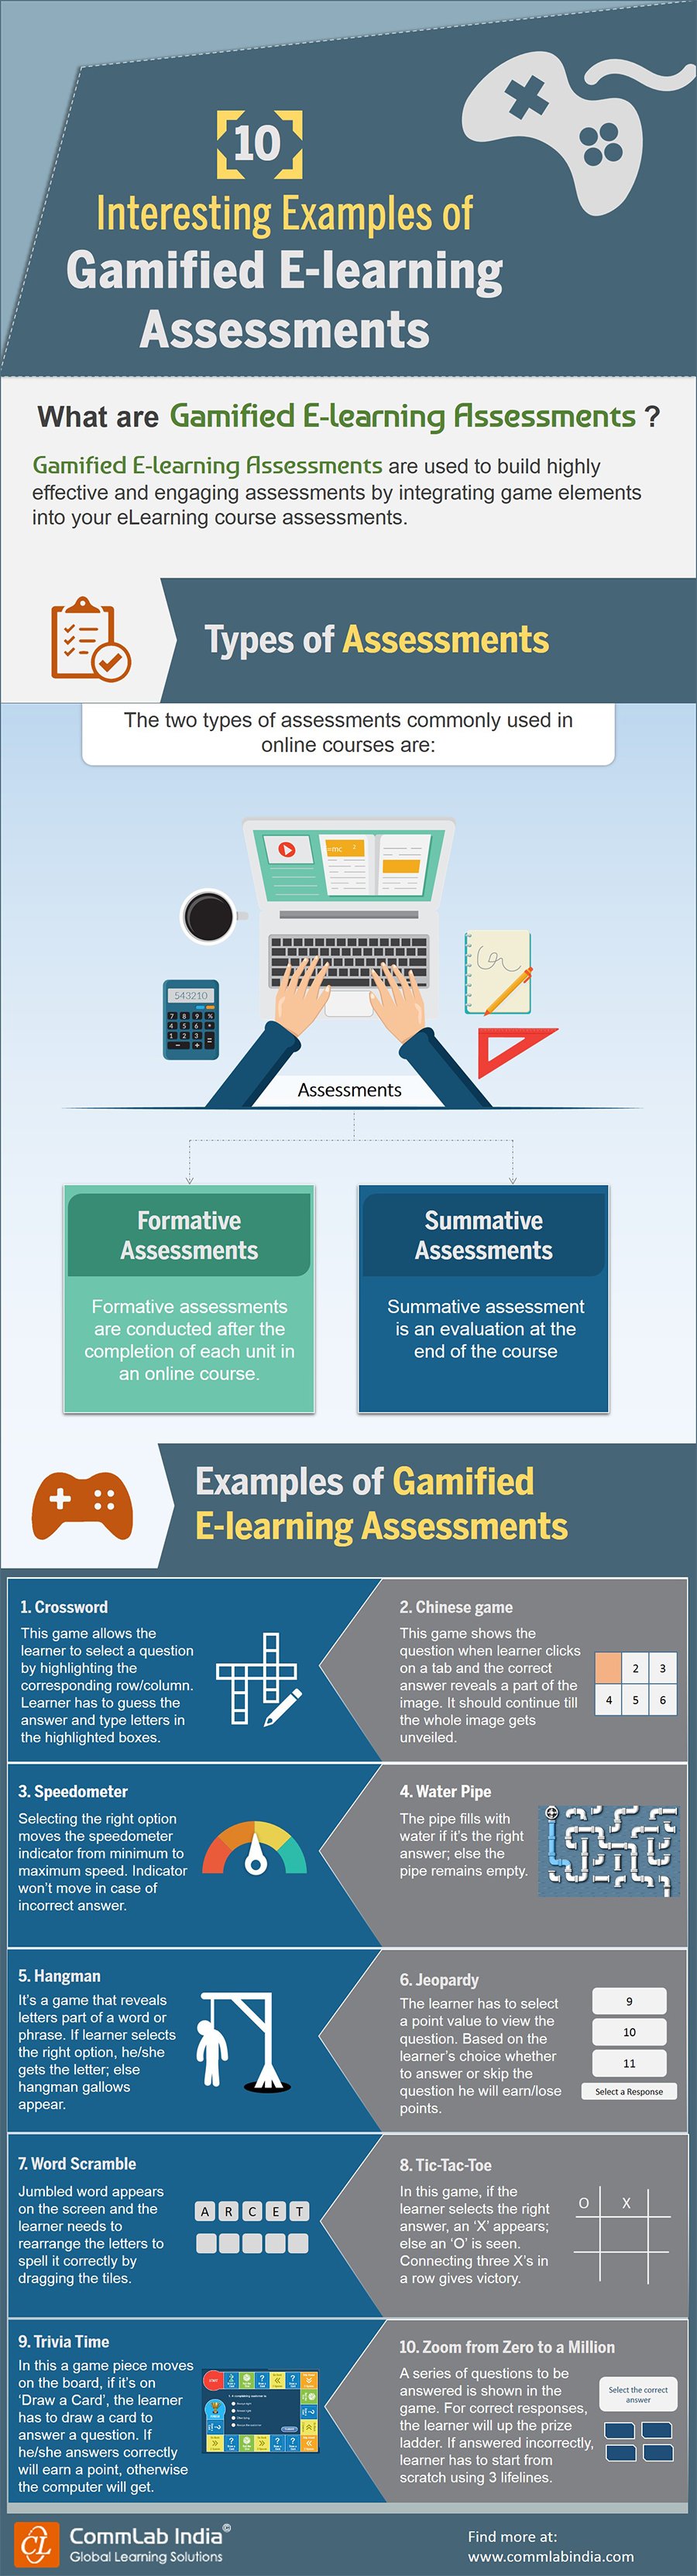 10 Interesting Examples of Gamified E-learning Assessments